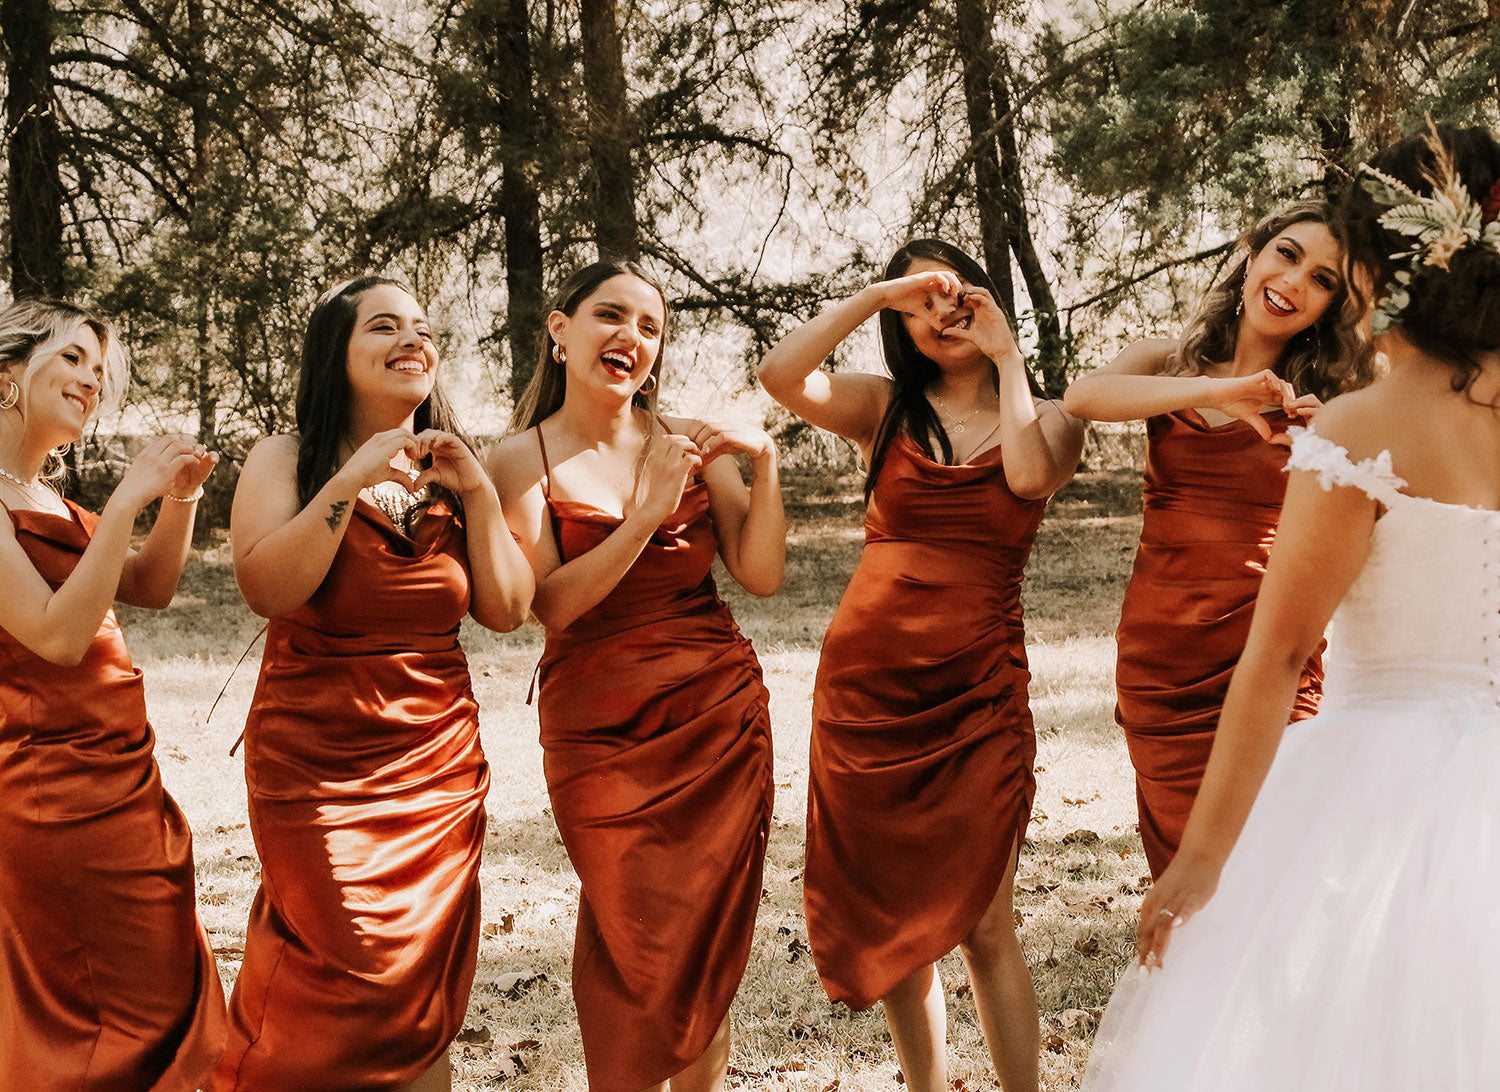 The first choice for autumn and winter wedding. Get inspired by our favorite rust-colored bridesmaid dresses, with styles for everyone at your nuptial party.